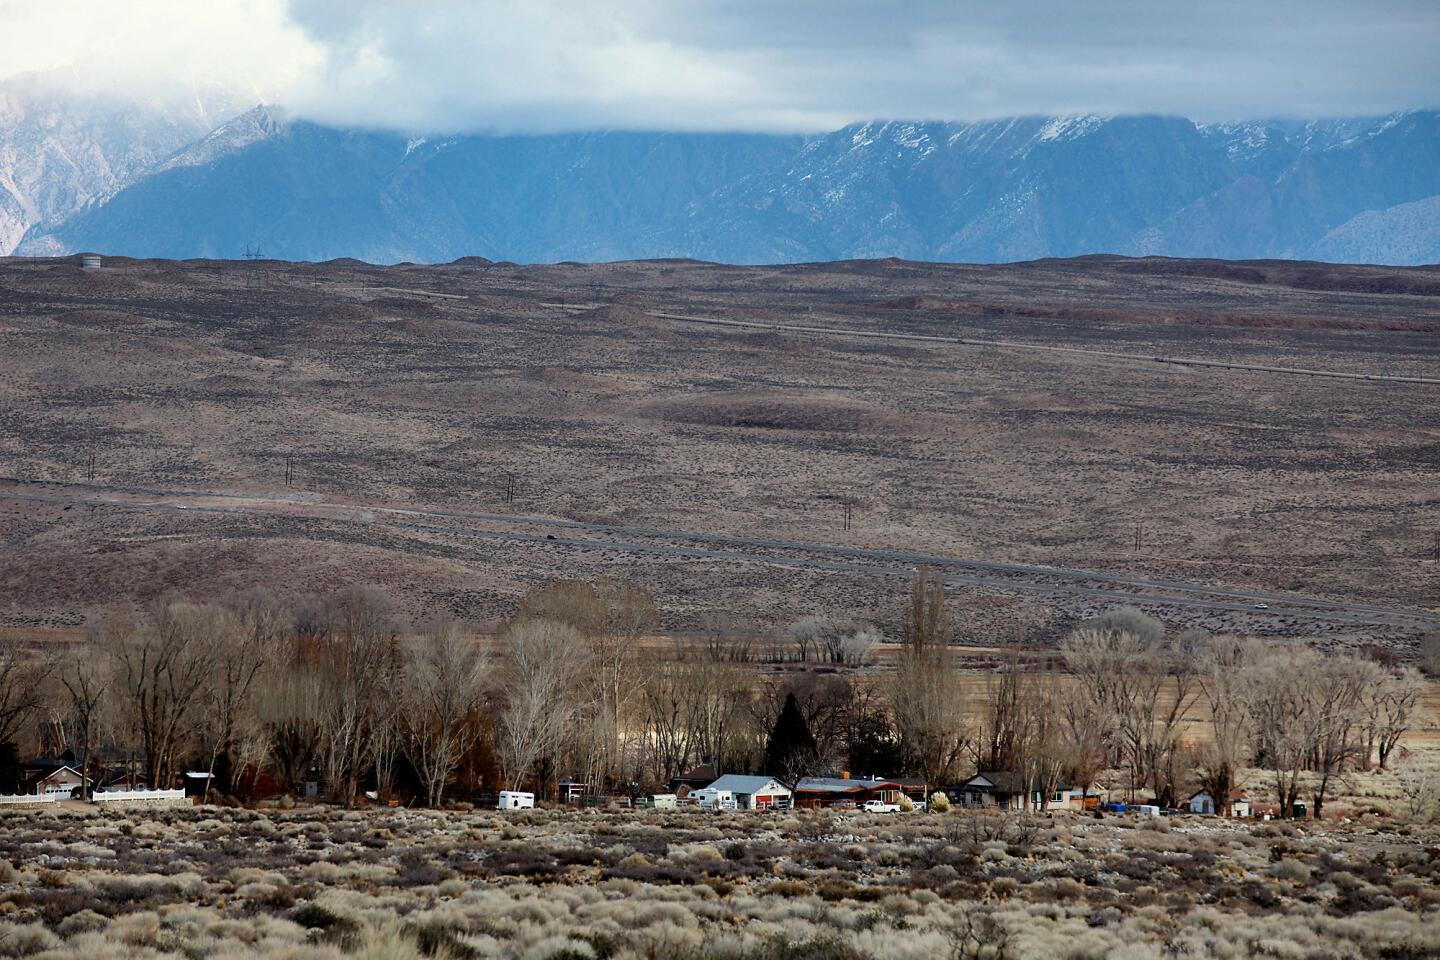 DWP looks to settle Owens Valley disputes